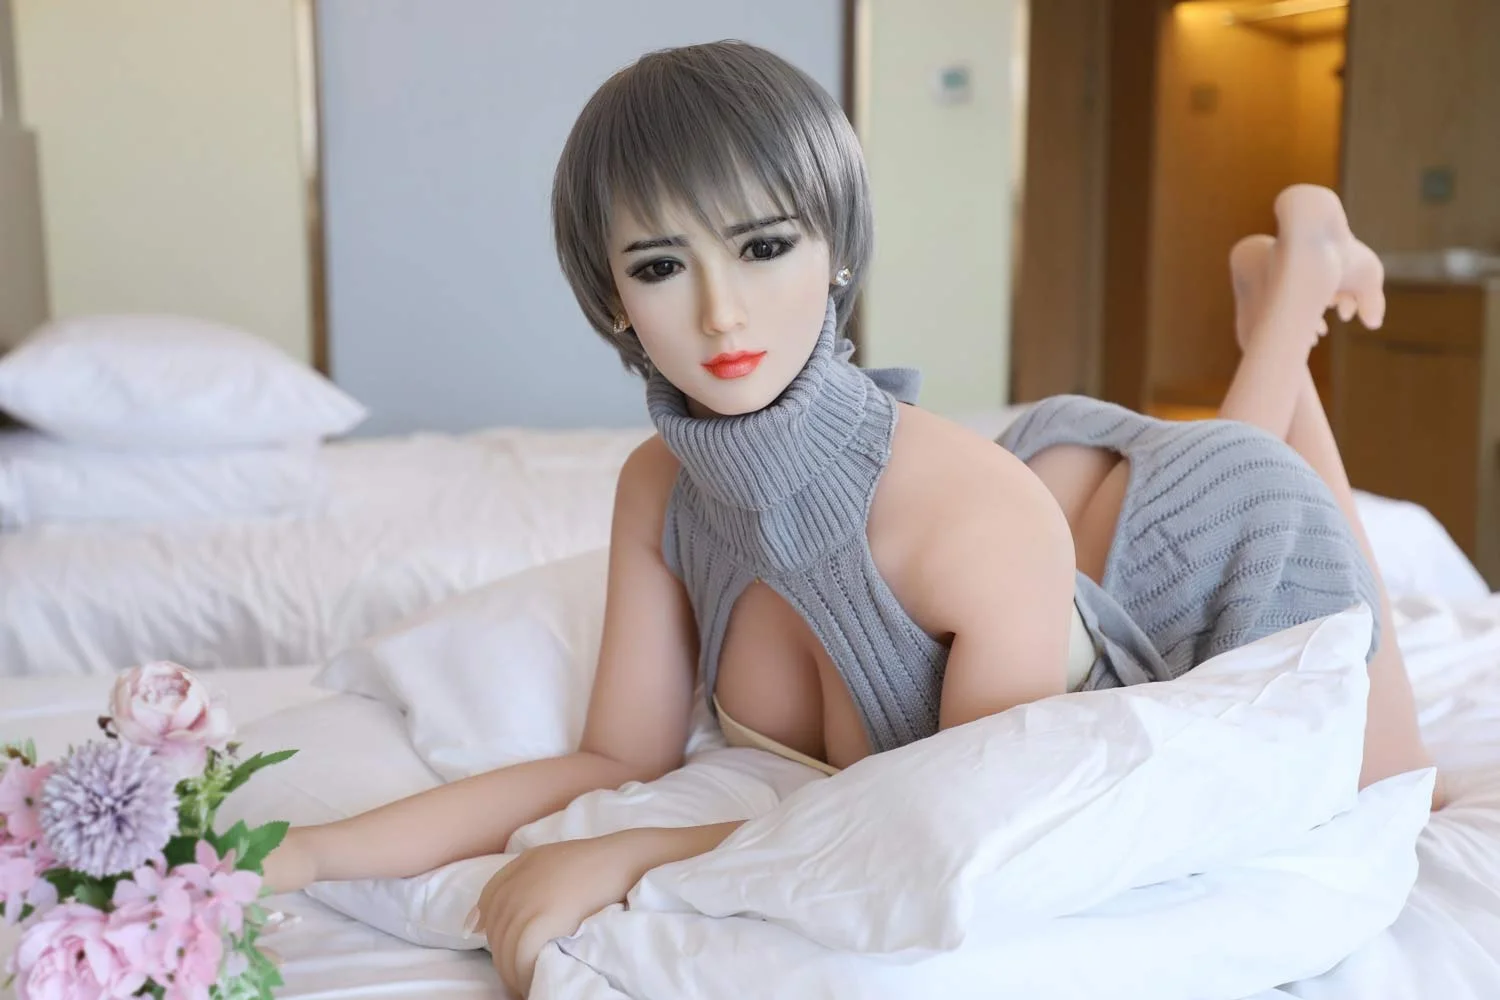 Silicone sex doll lying on the bed